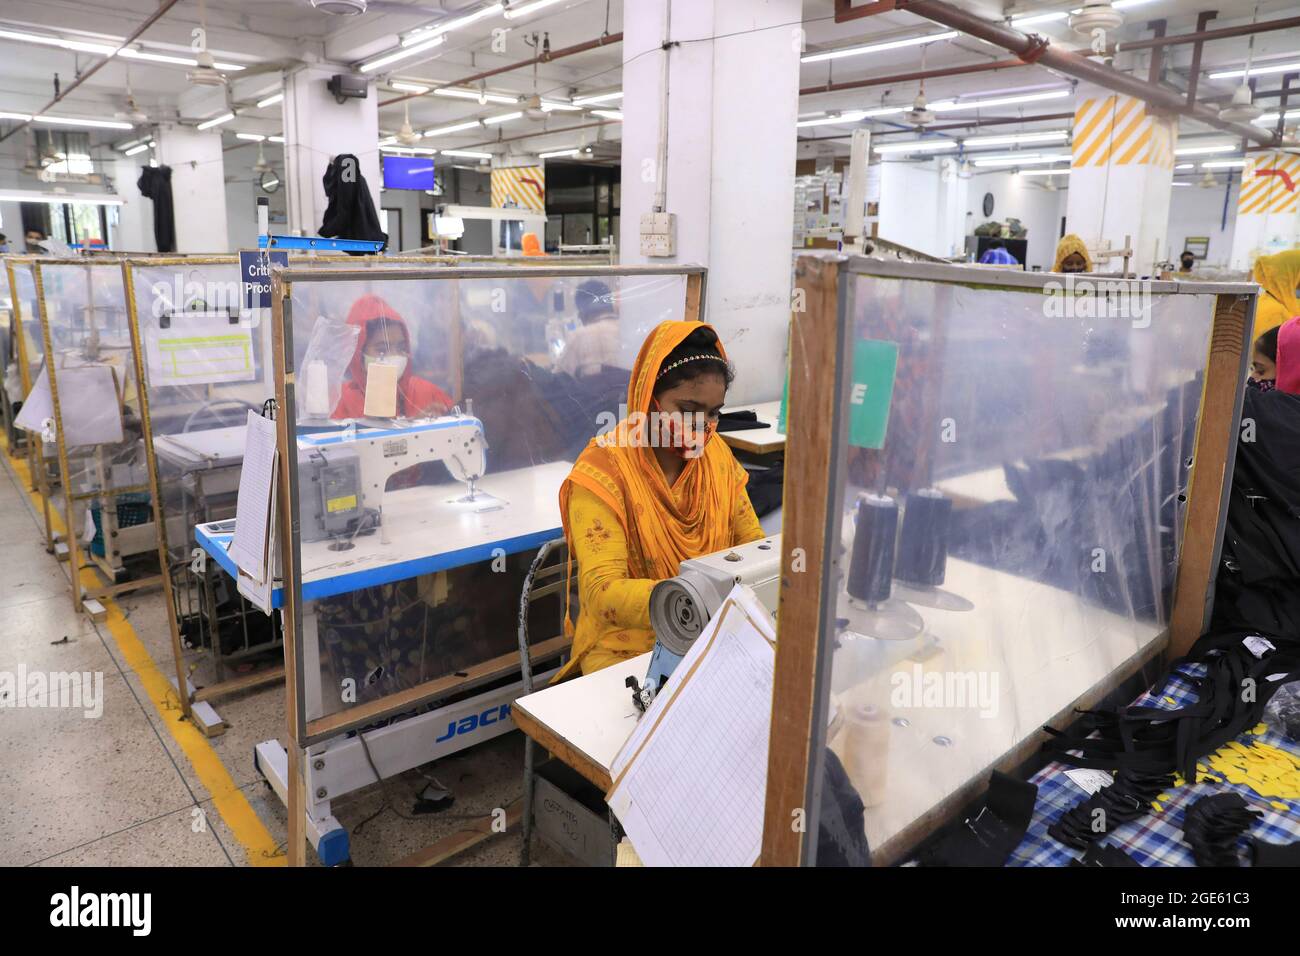 DHAKA, BANGLADESH - AUGUST 12: A woman manufactures clothes in a textile factory in the Gazipur industrial zone on the outskirts of Dhaka. Despite the lockdown measures, imposed across the country by the coronavirus, Bangladeshi textile factories have resumed production of clothing, which They supply the most important brands in the world and represent 84% of the country's total exports. Bangladesh is one of the largest textile exporters in the world employing more than 4 million people, most of them women. Bangladesh's labor force is one of the cheapest in the region, and as a result, it has Stock Photo